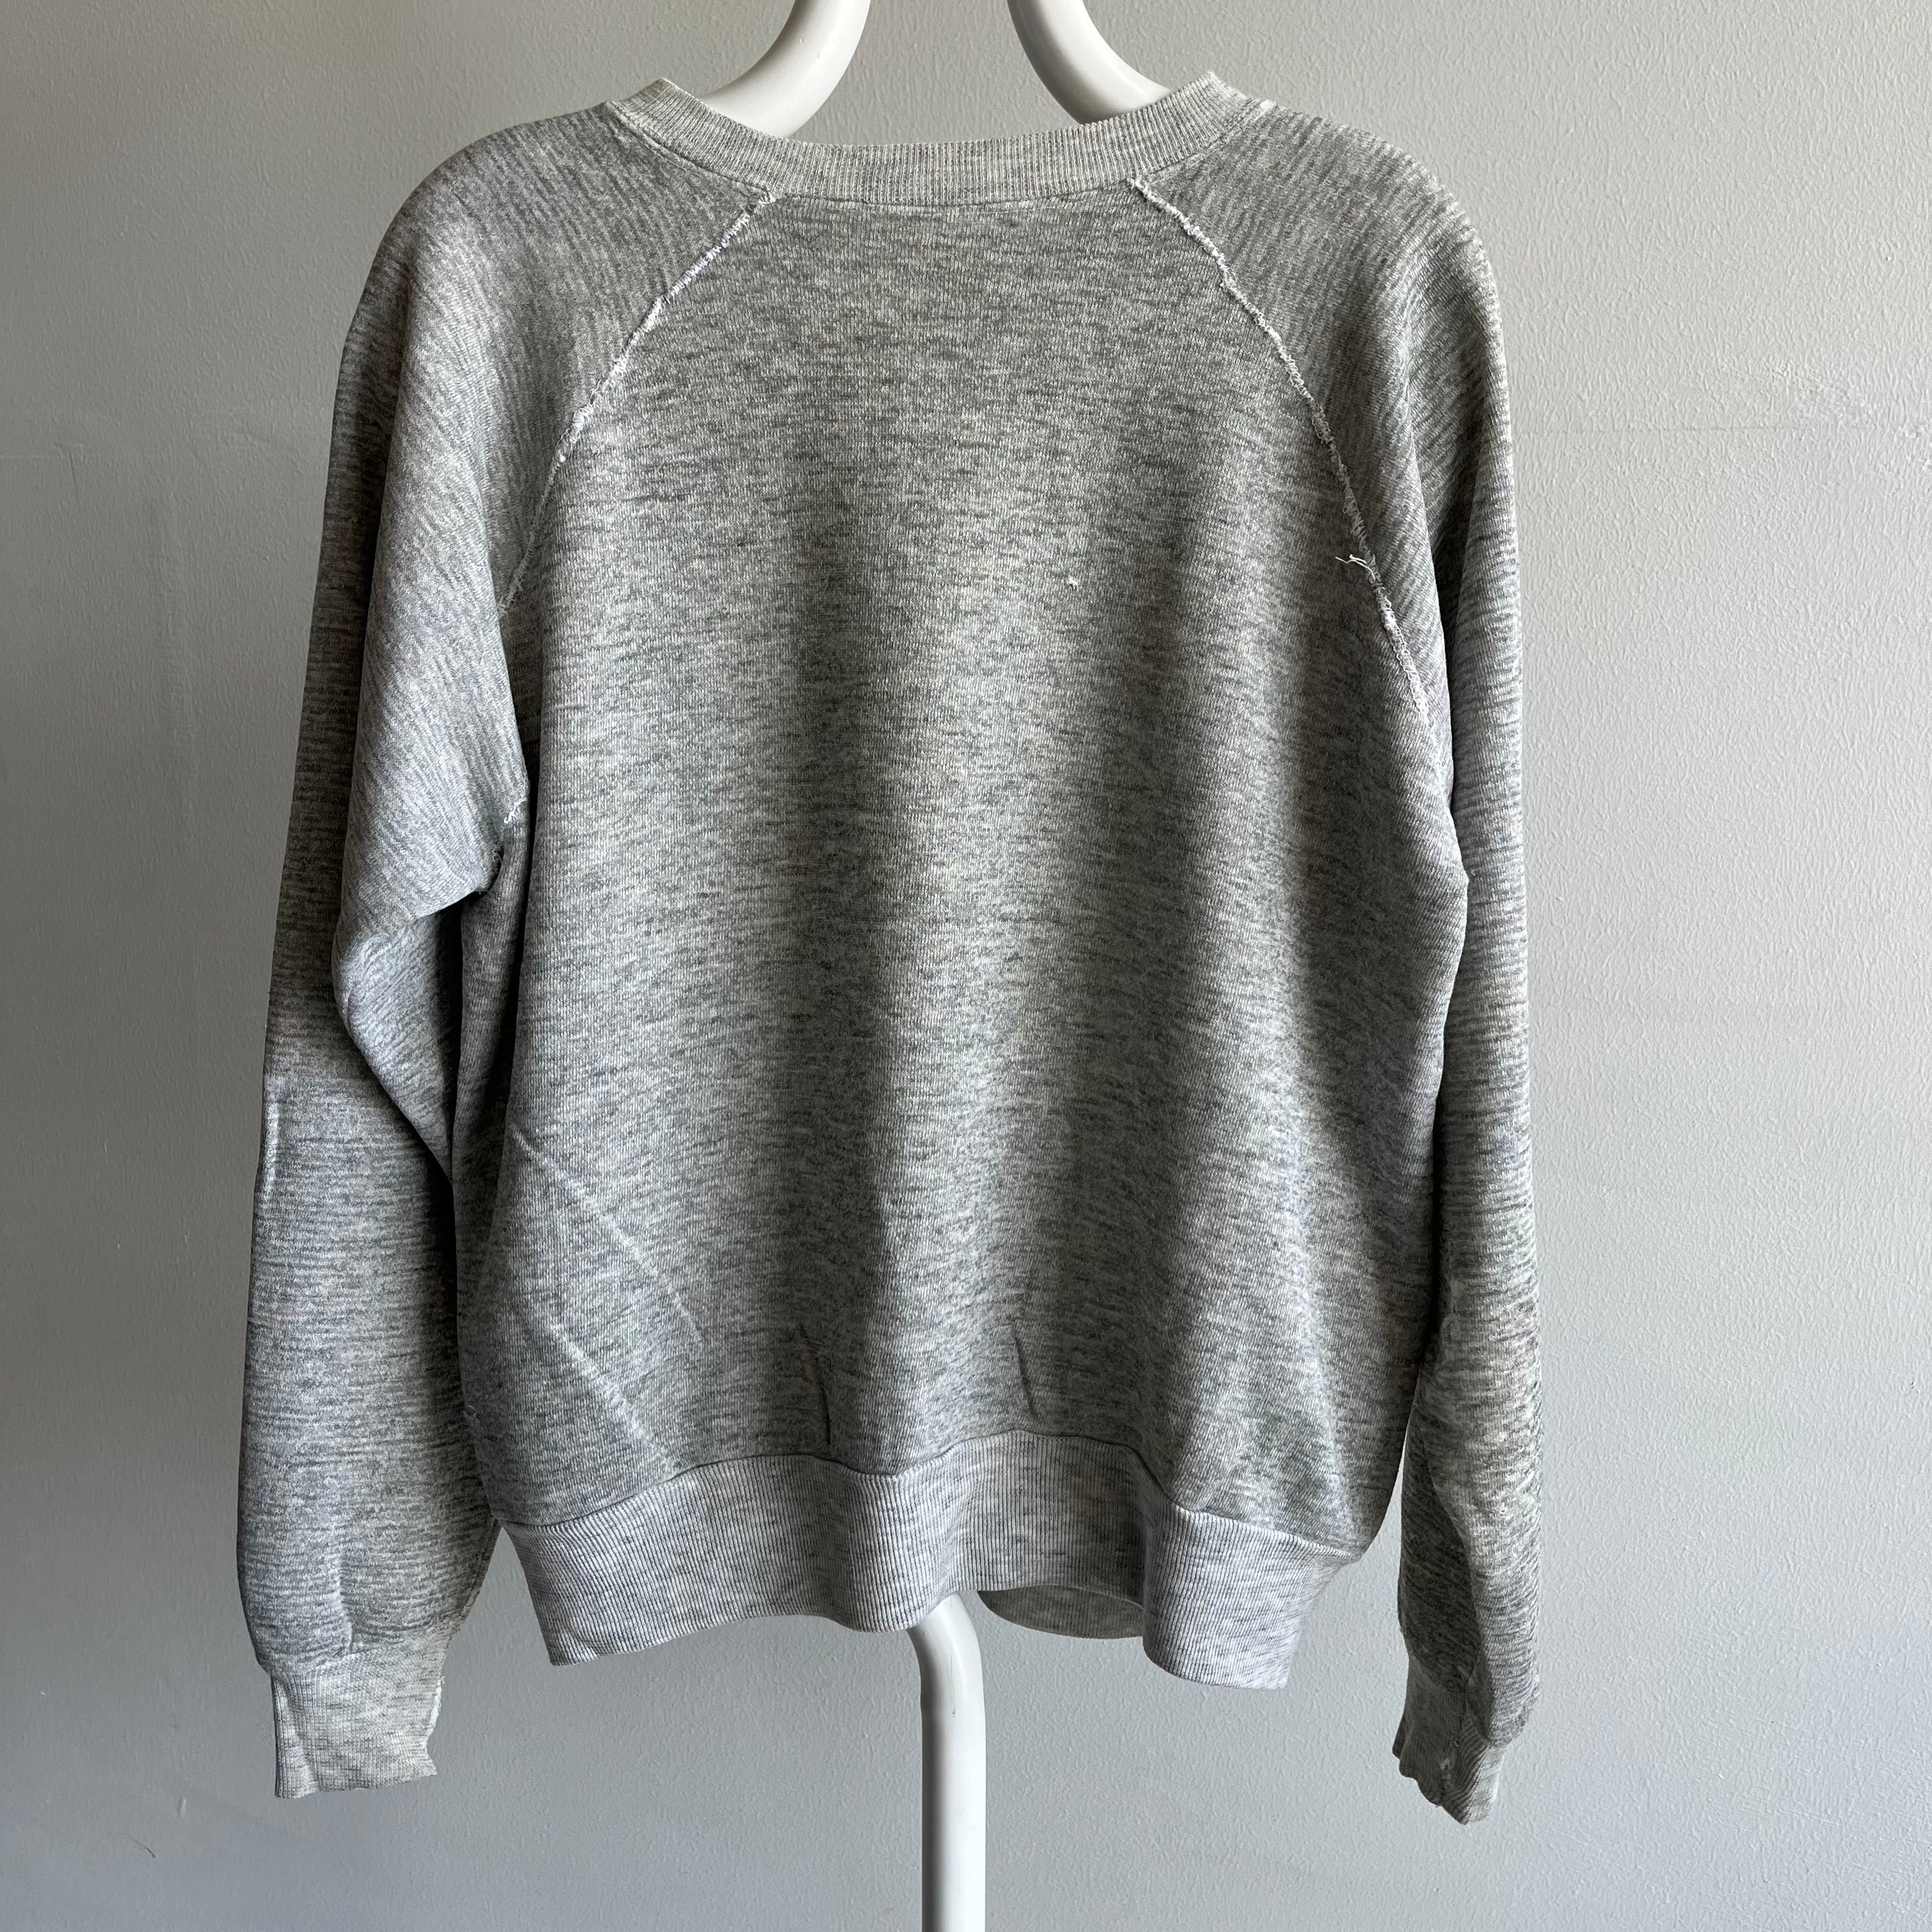 1980s Blank Thinned Out Gray Worn Raglan